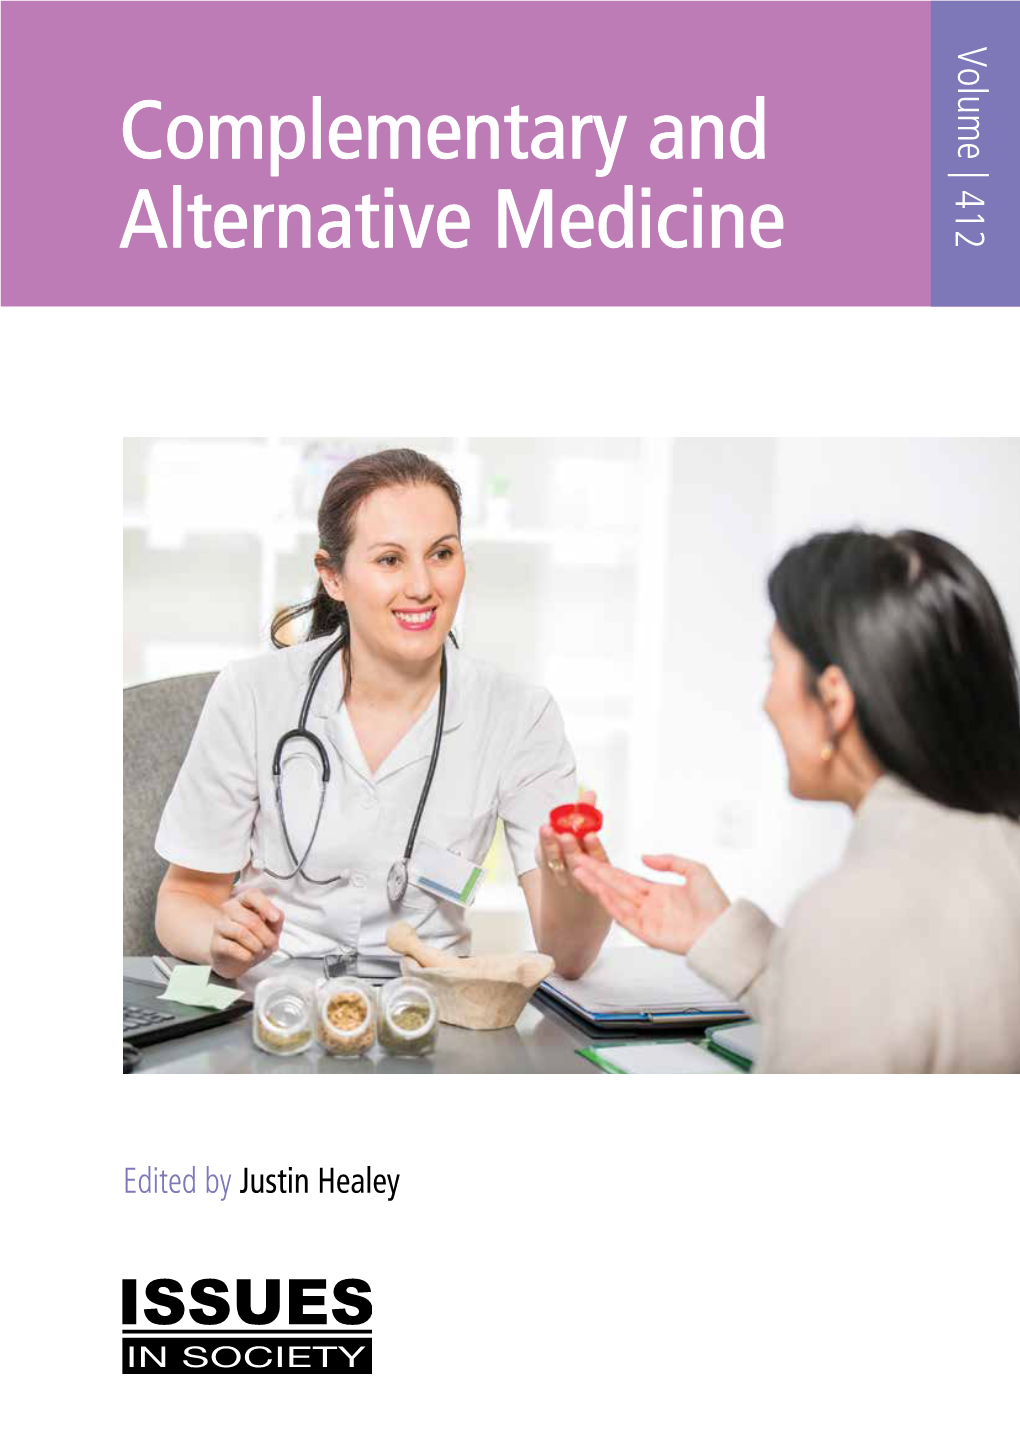 Complementary and Alternative Medicine 412 COMPLEMENTARY and ALTERNATIVE MEDICINE